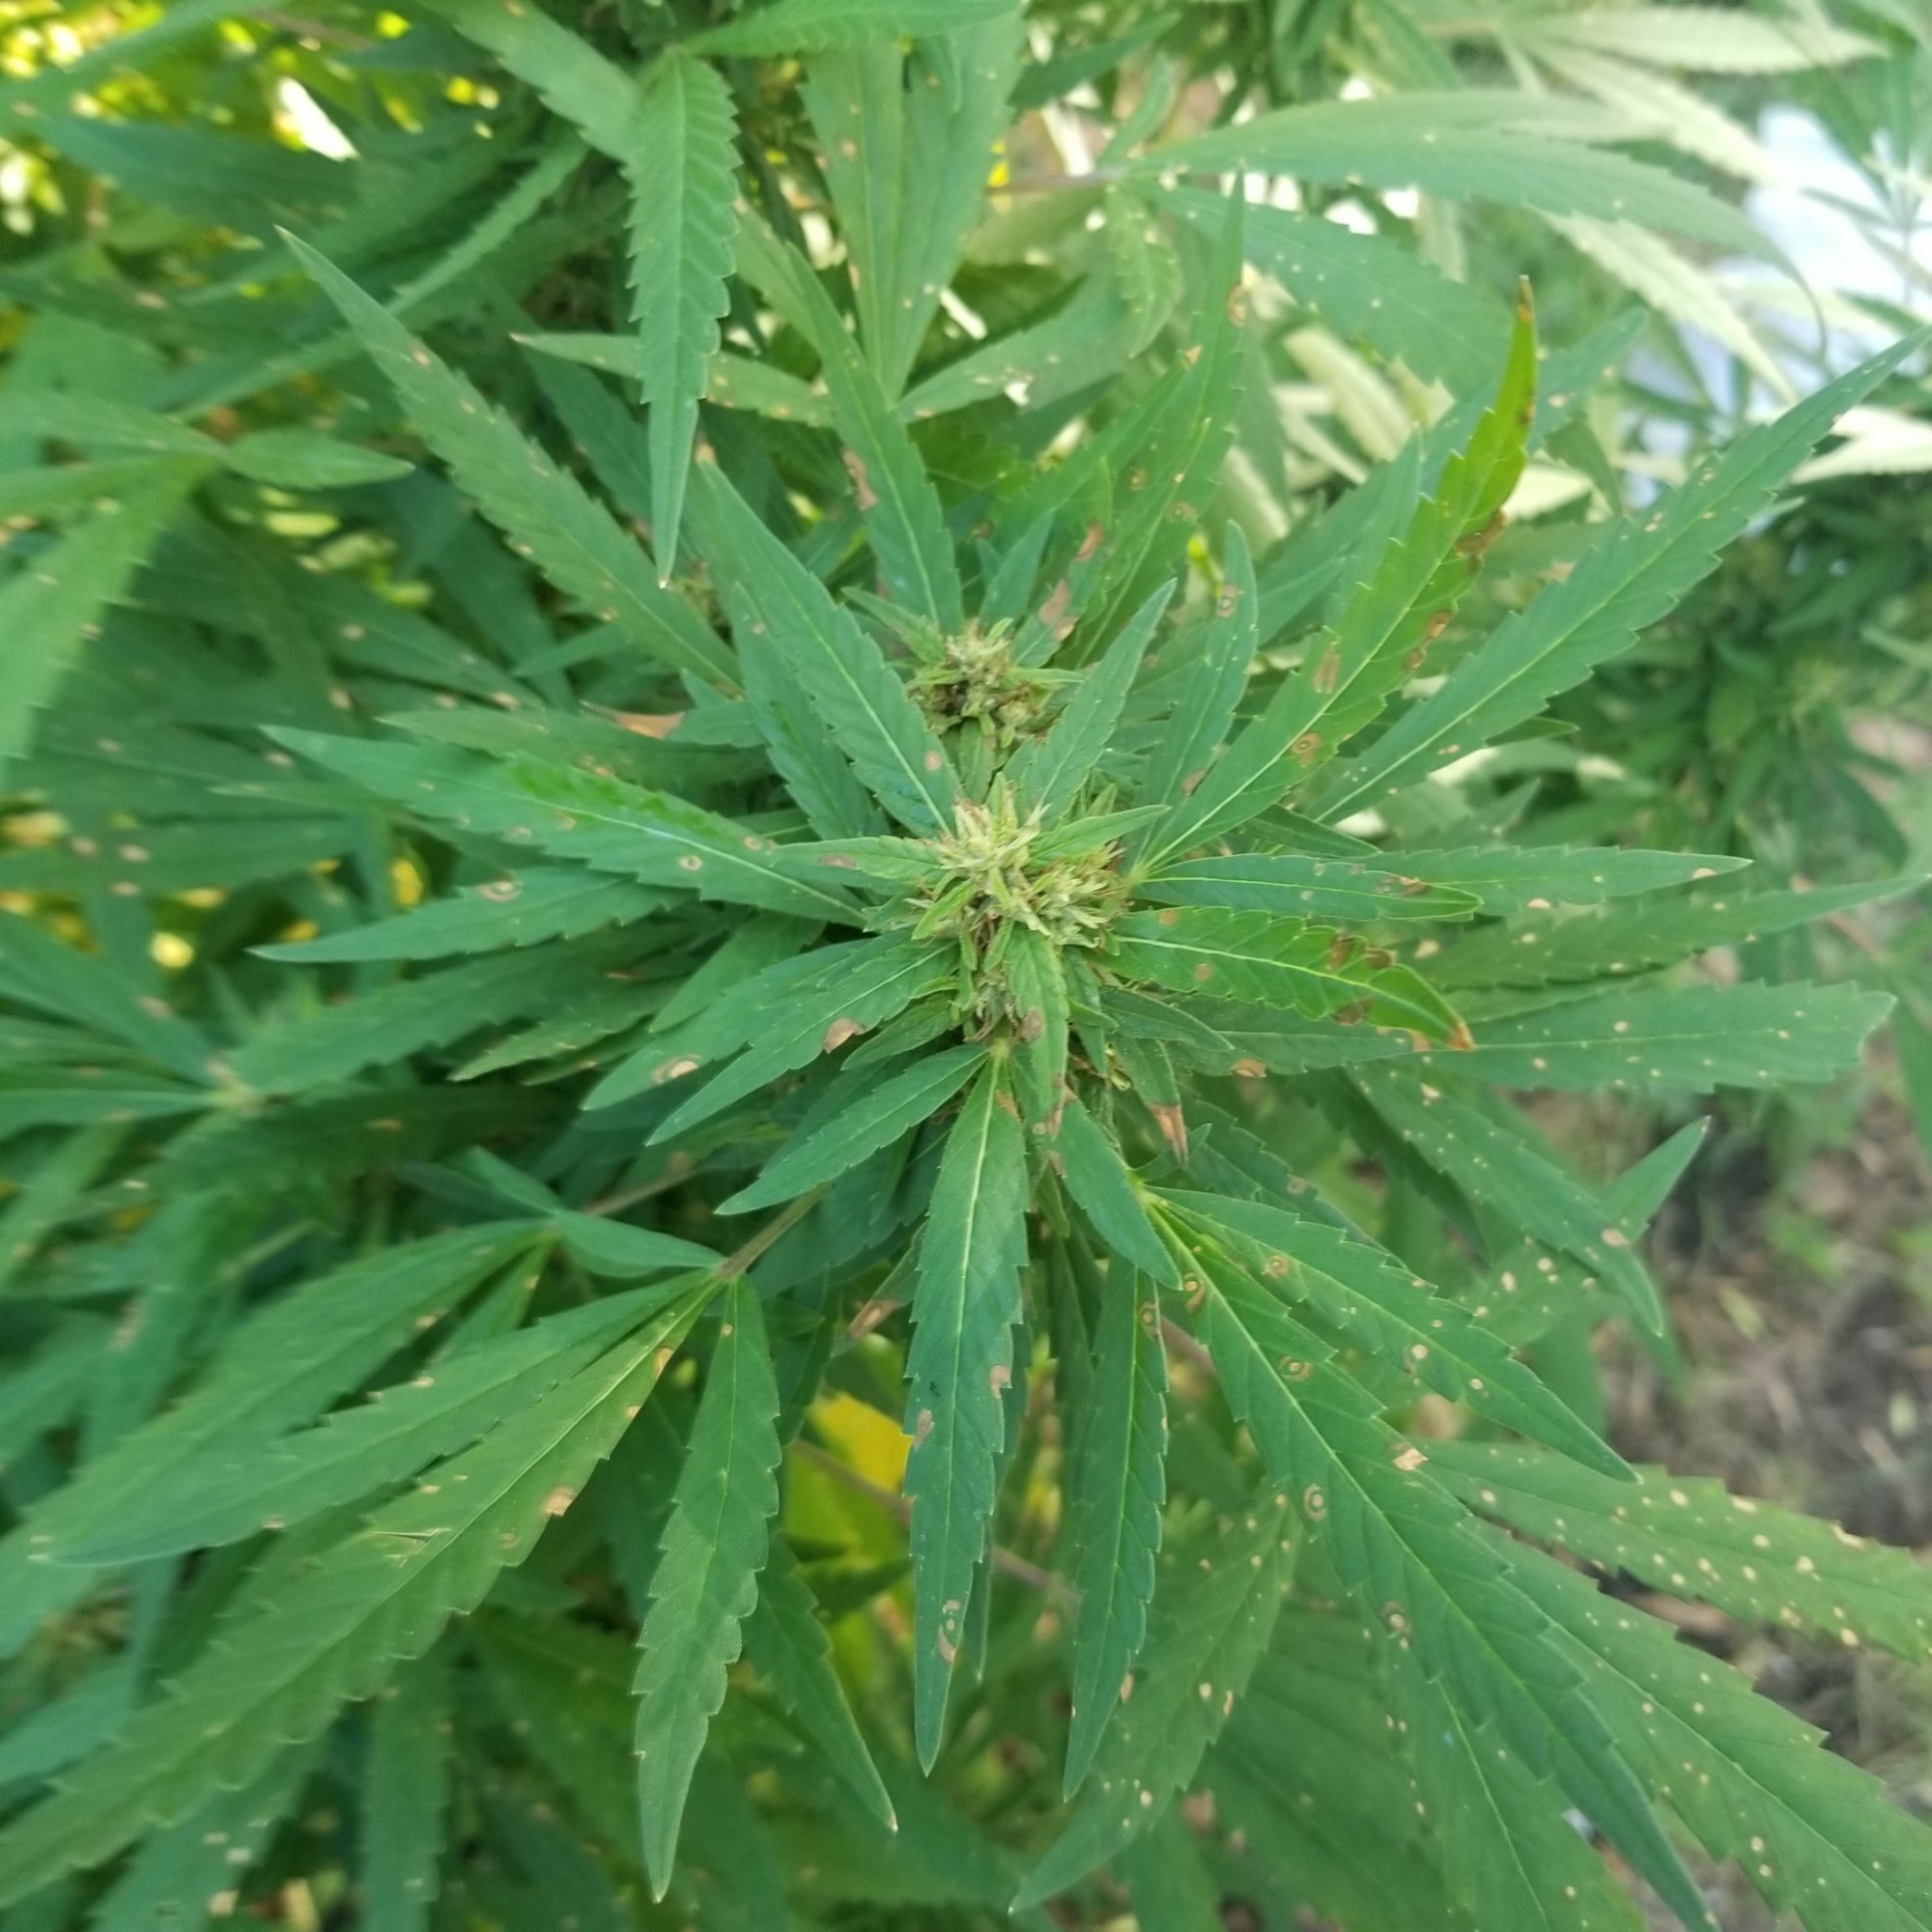 Whats going on with my plant